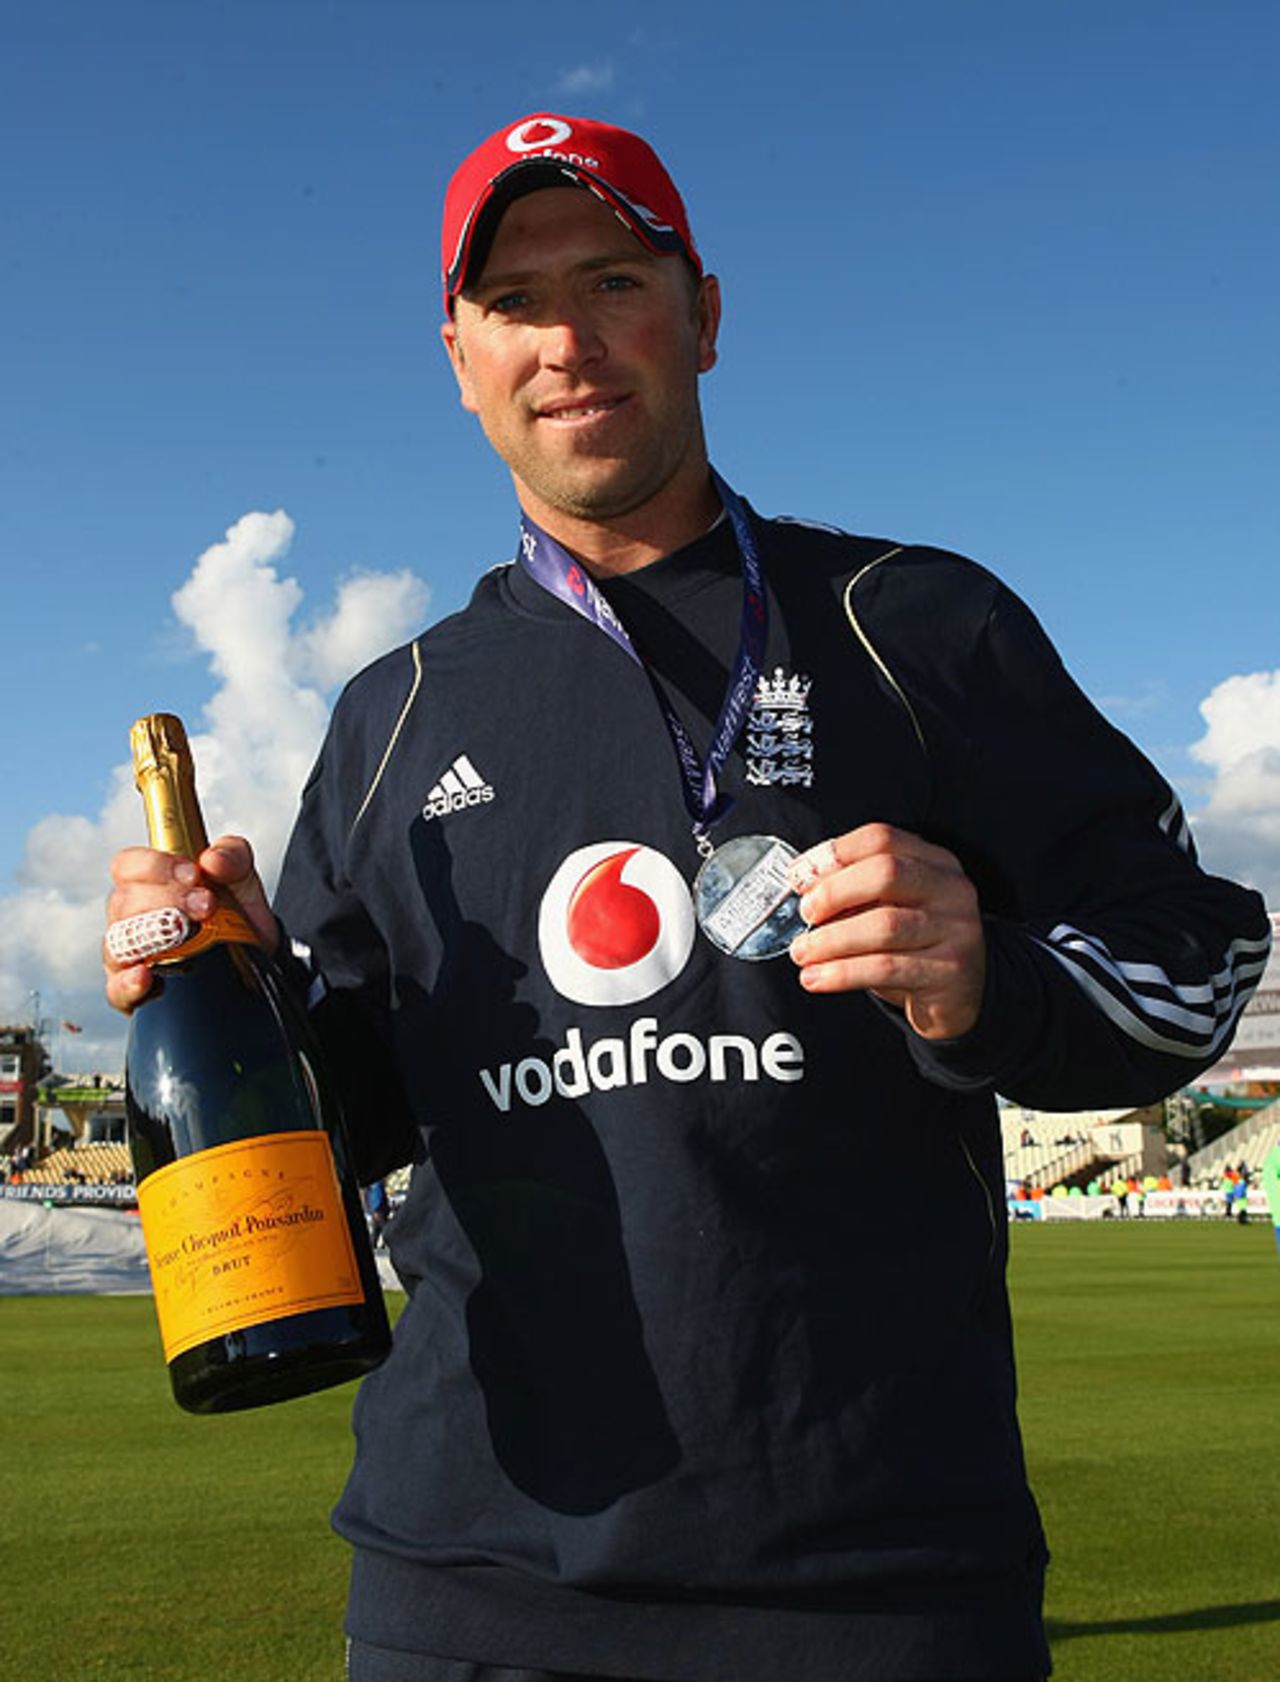 Matt Prior was named Man of the Match for his 87 from 86 balls, England v West Indies, 3rd ODI, Edgbaston, May 26, 2009